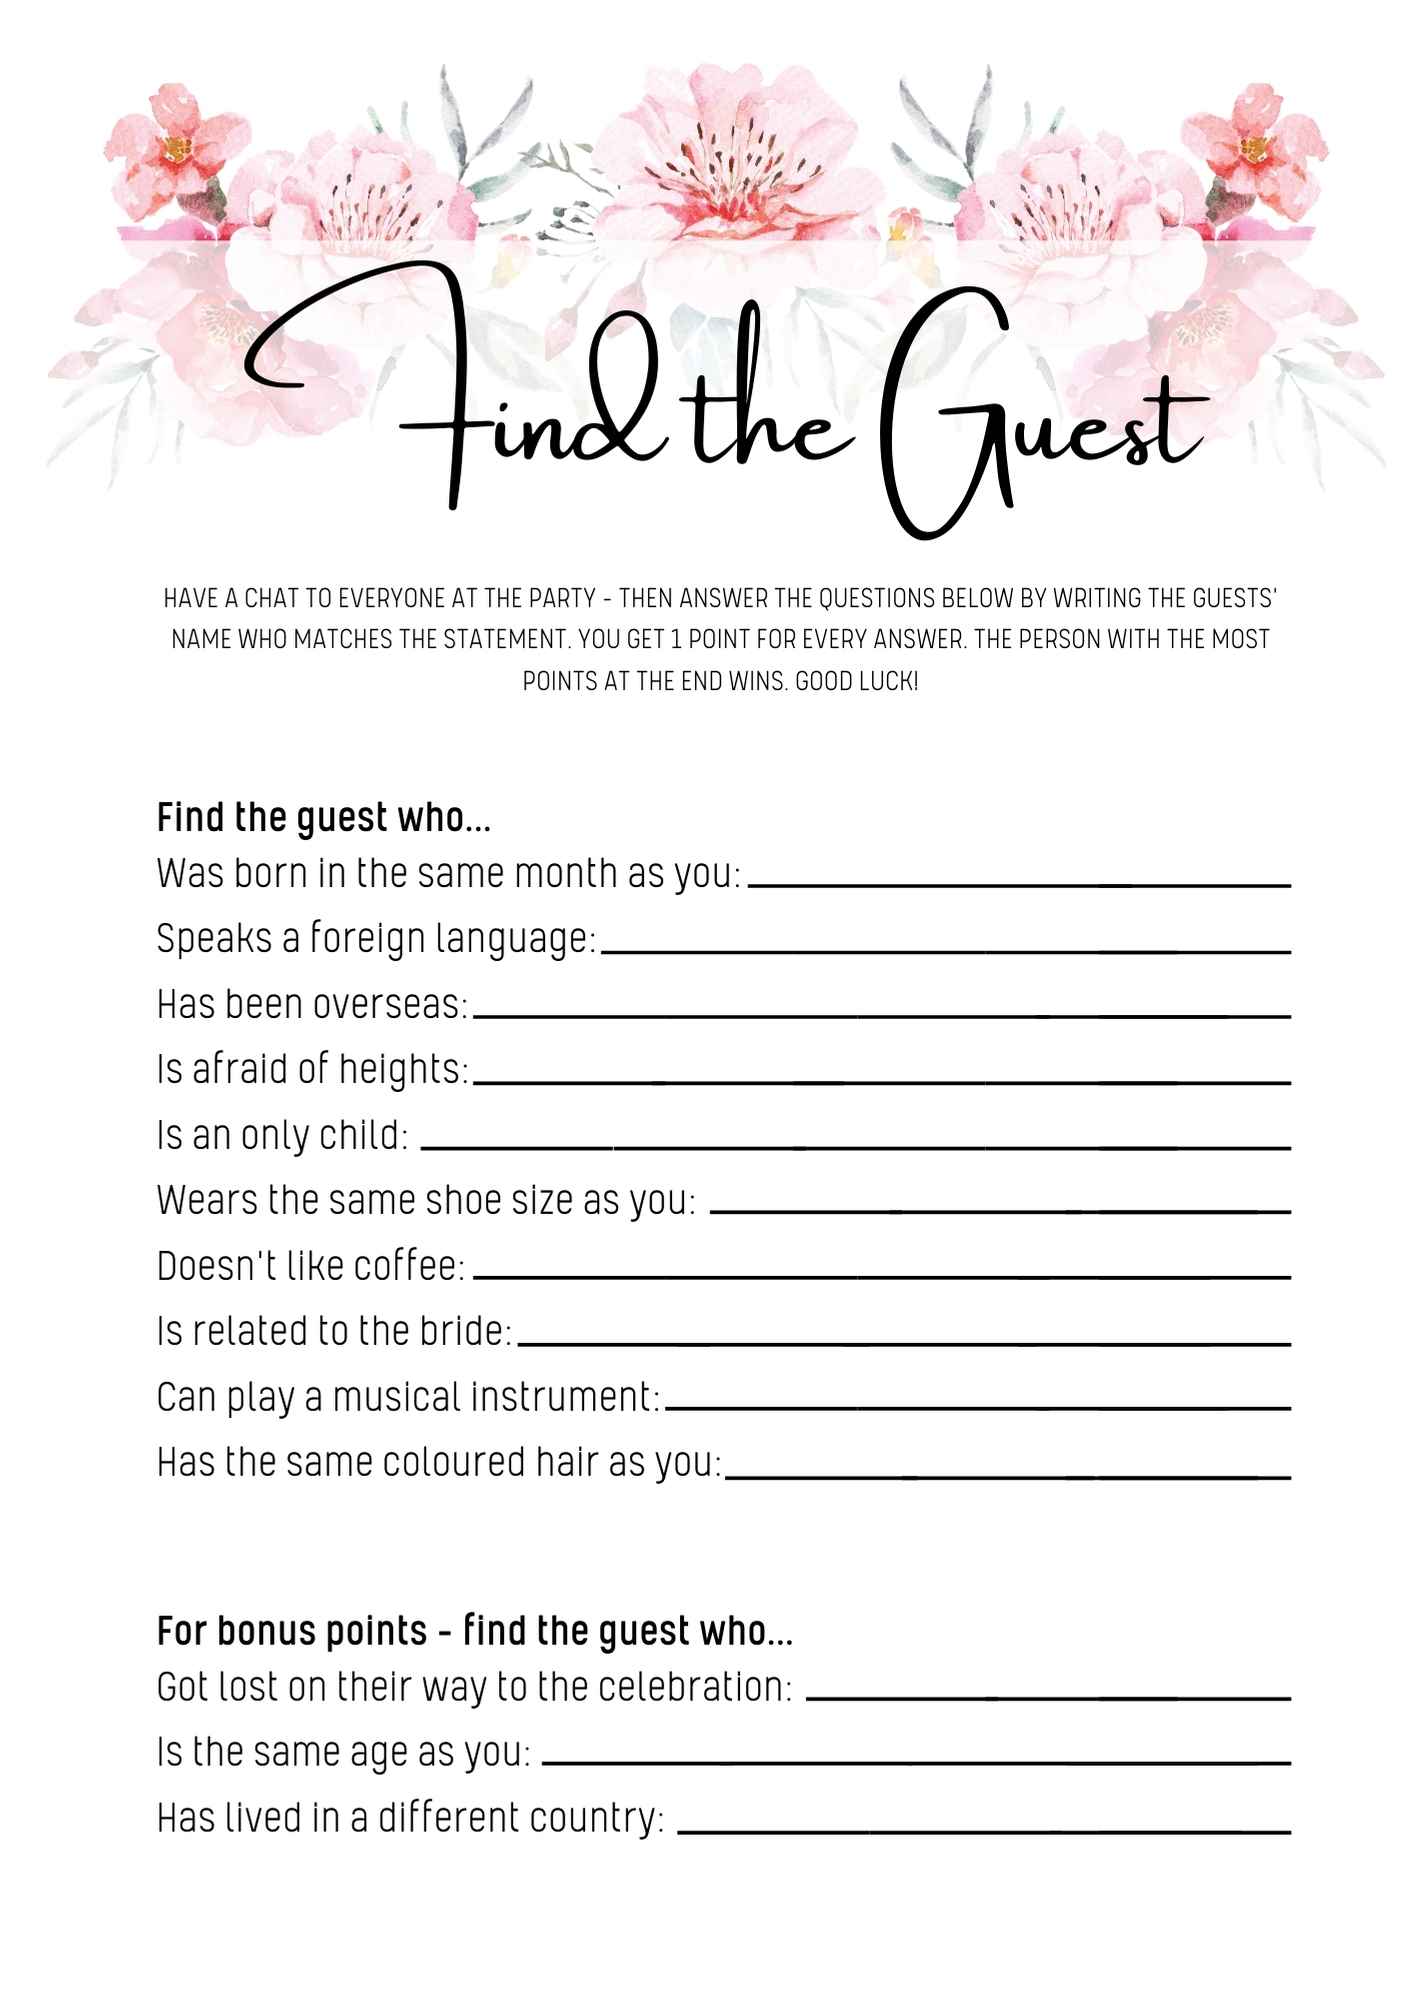 stunning-find-the-guest-bridal-shower-game-printable